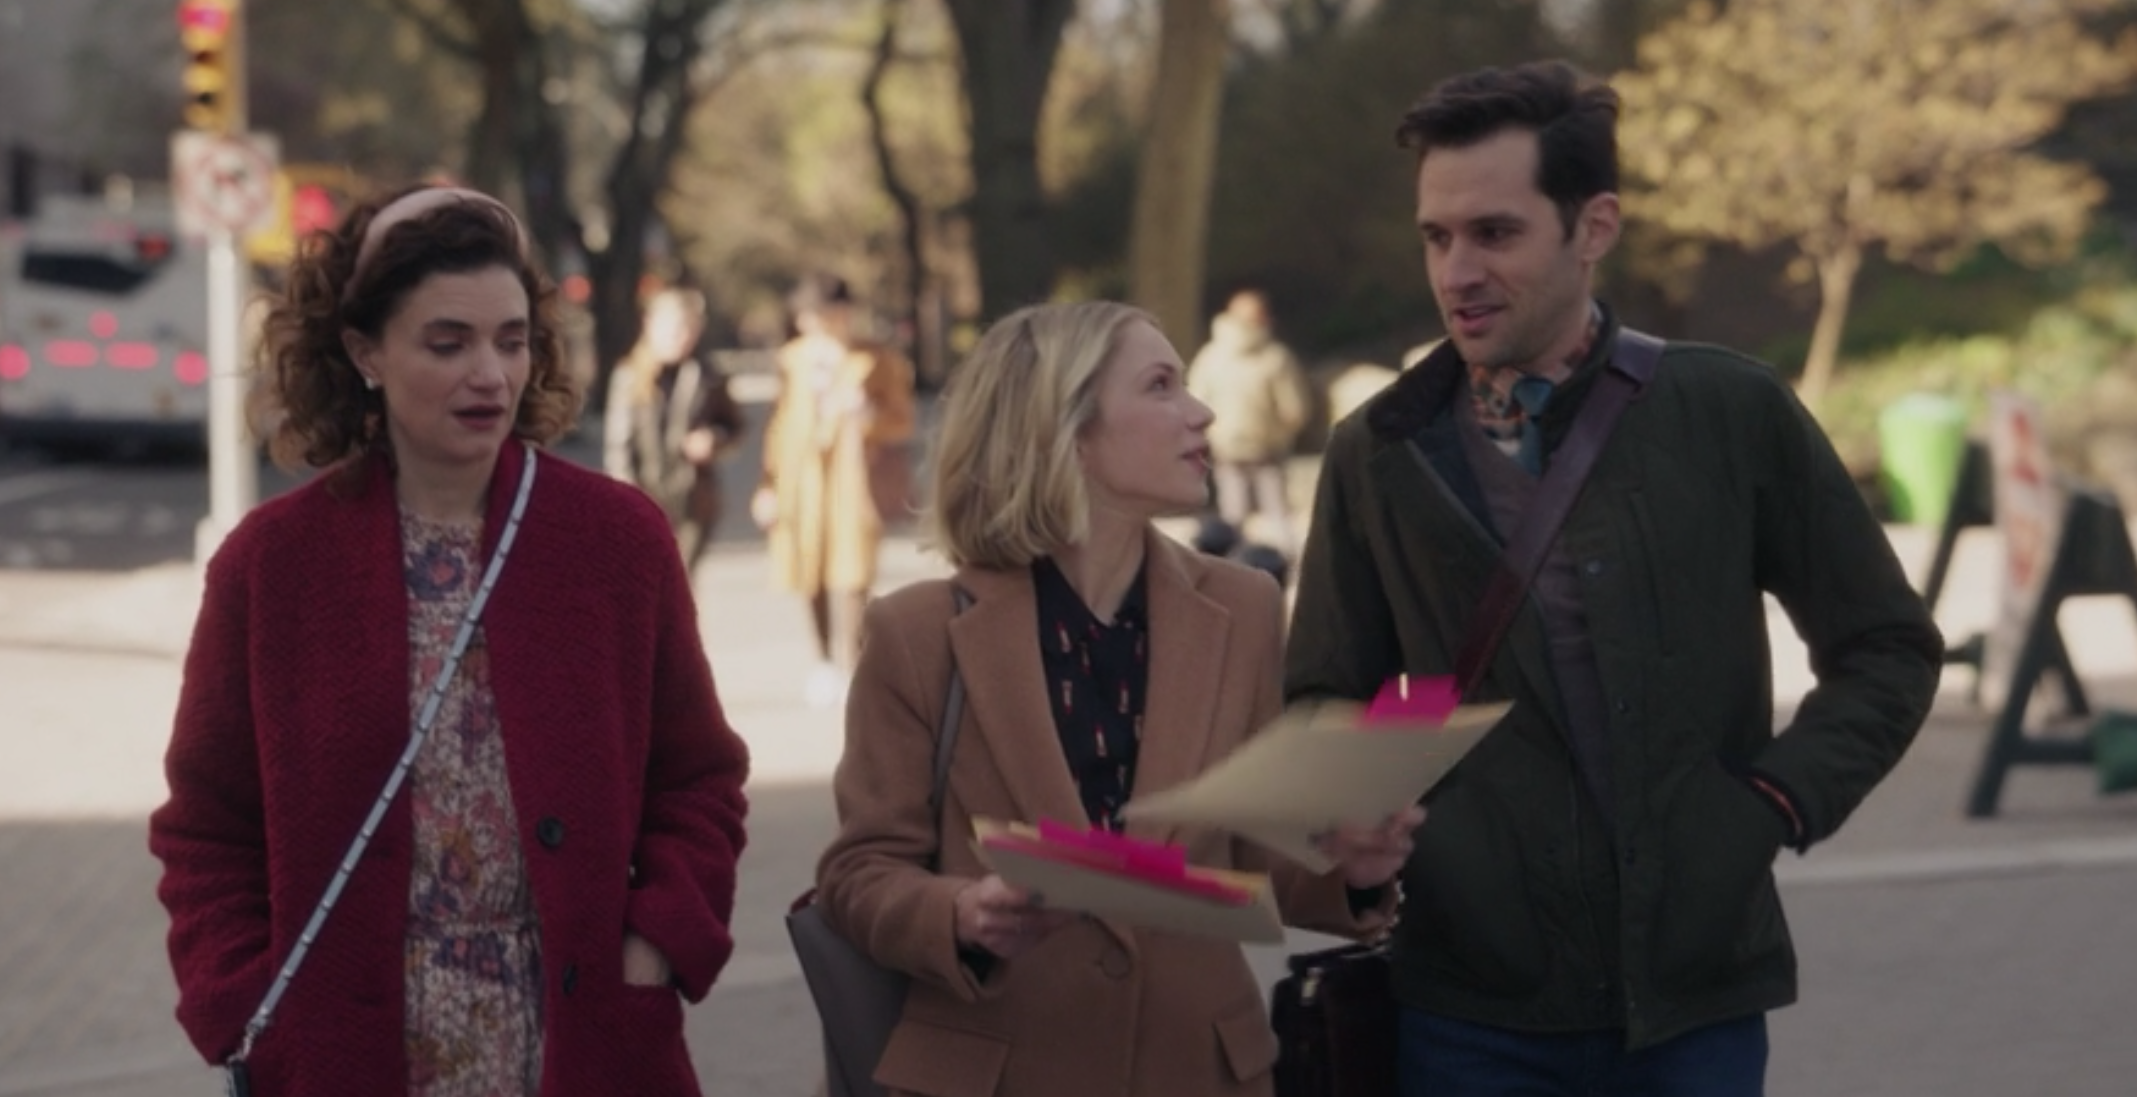 Wendy wears a floral dress under a peacoat, Kate wears a patterned blouse under a wool coat, and Jordan wears a V-neck sweater under a thin jacket